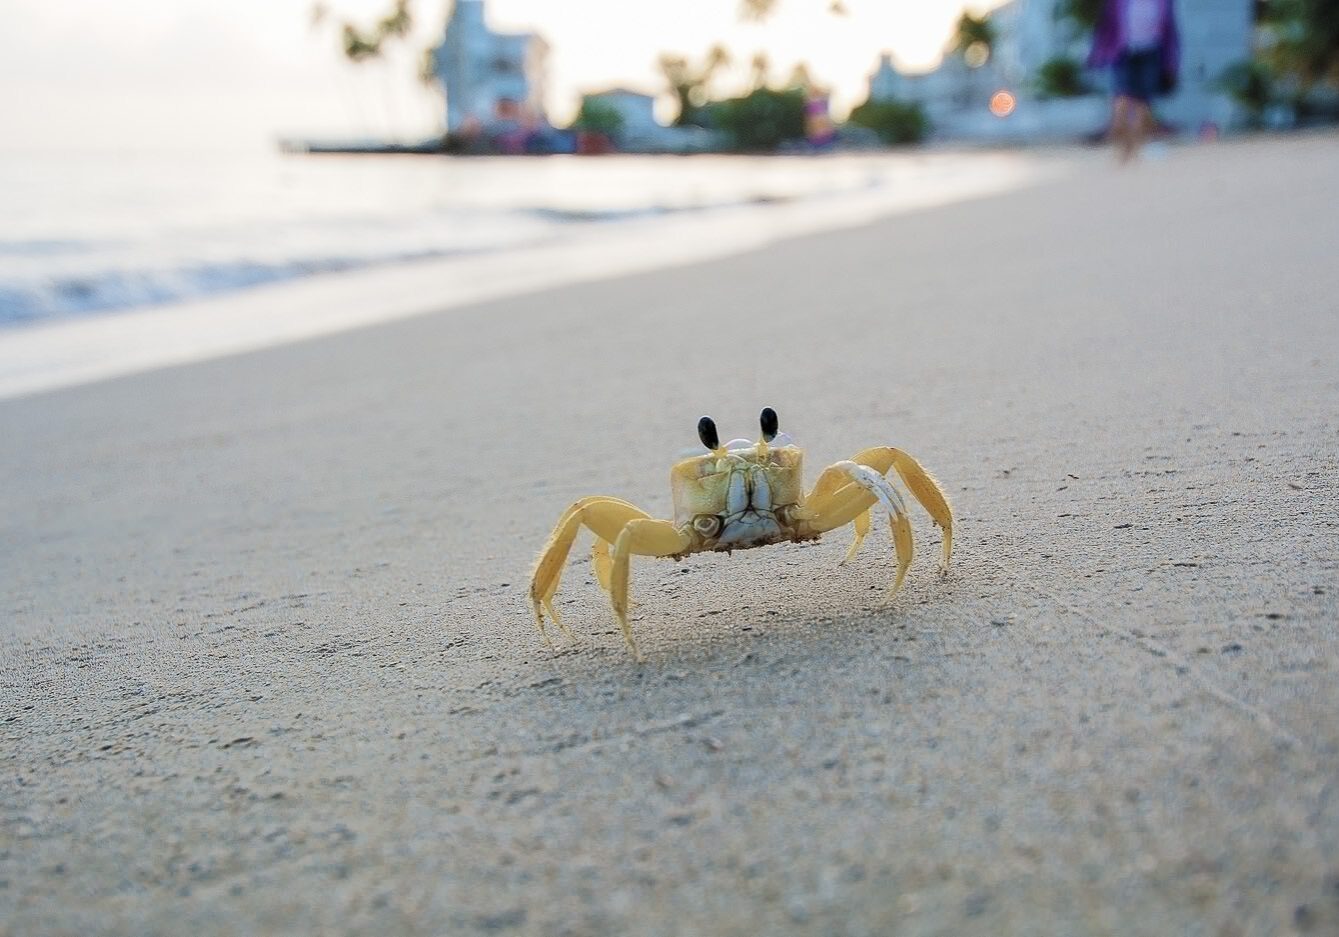 Almost Stepped on this Disabled Fearless Yellow Crab. So as an Apology I did an early morning photo shoot with him (or her). Great subject to work with. #IslaVerde #PuertoRico